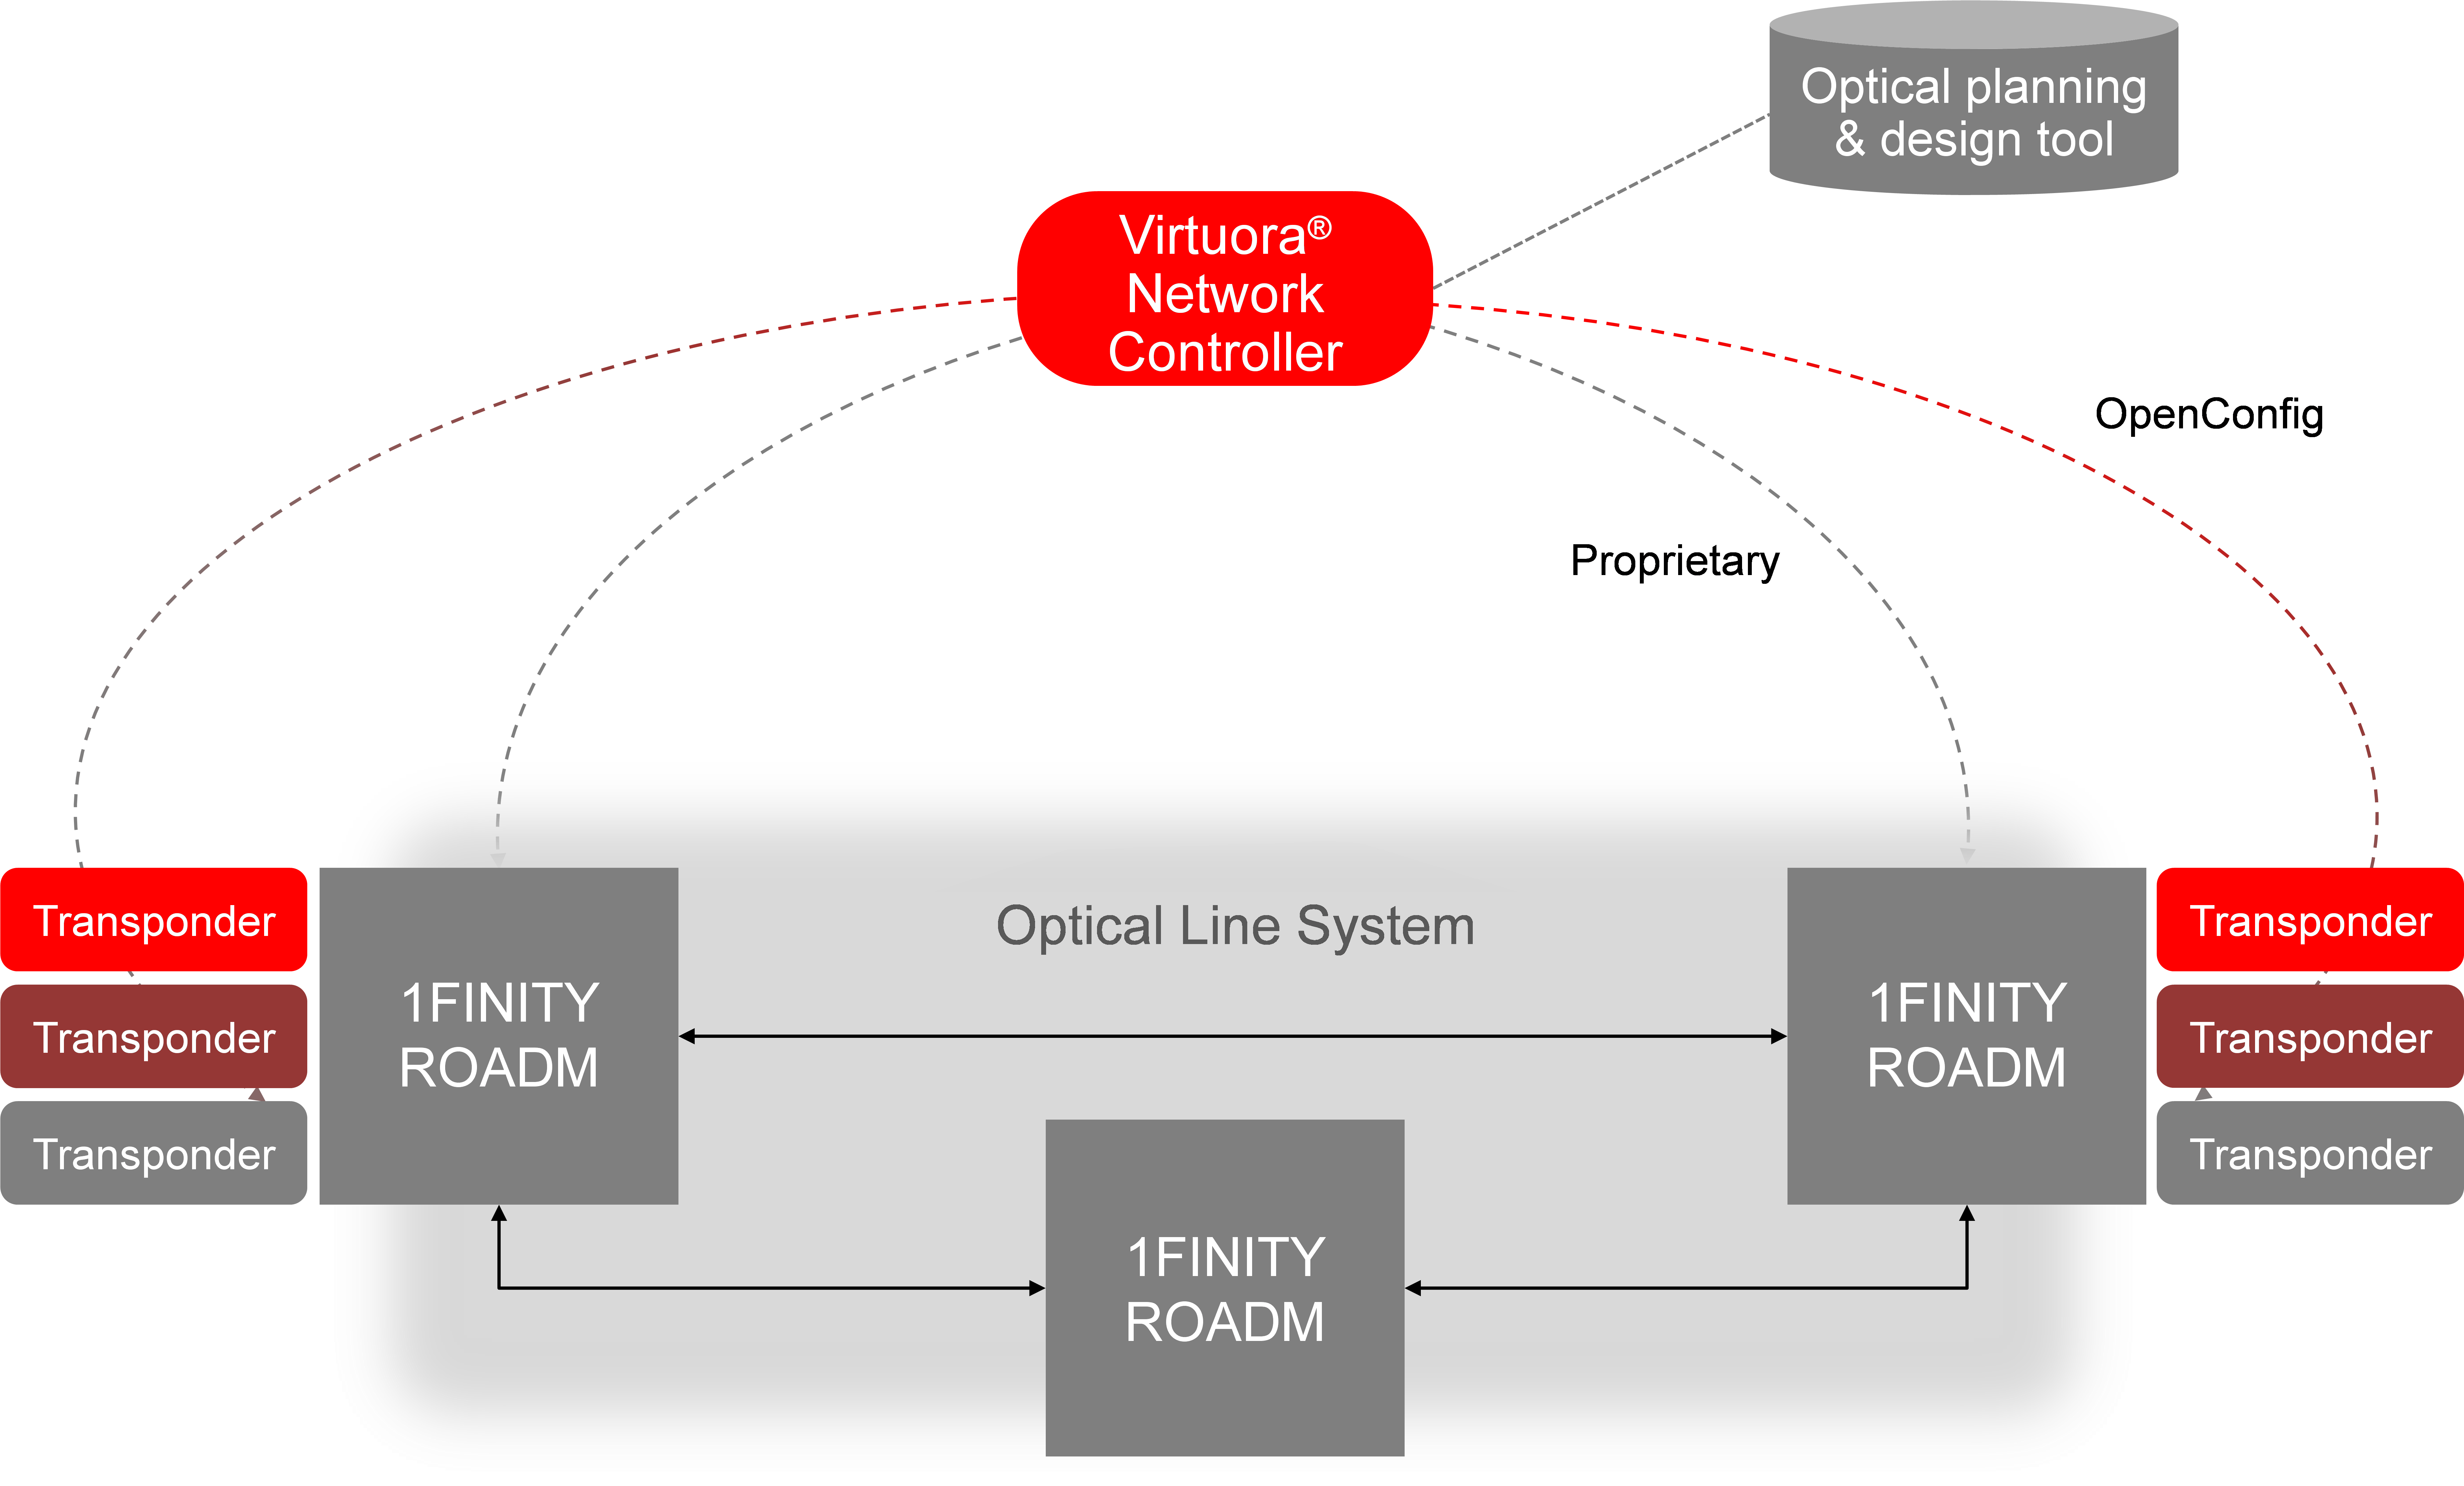 Figure 2: Multi-vendor optical network management with the Virtuora Network Controller